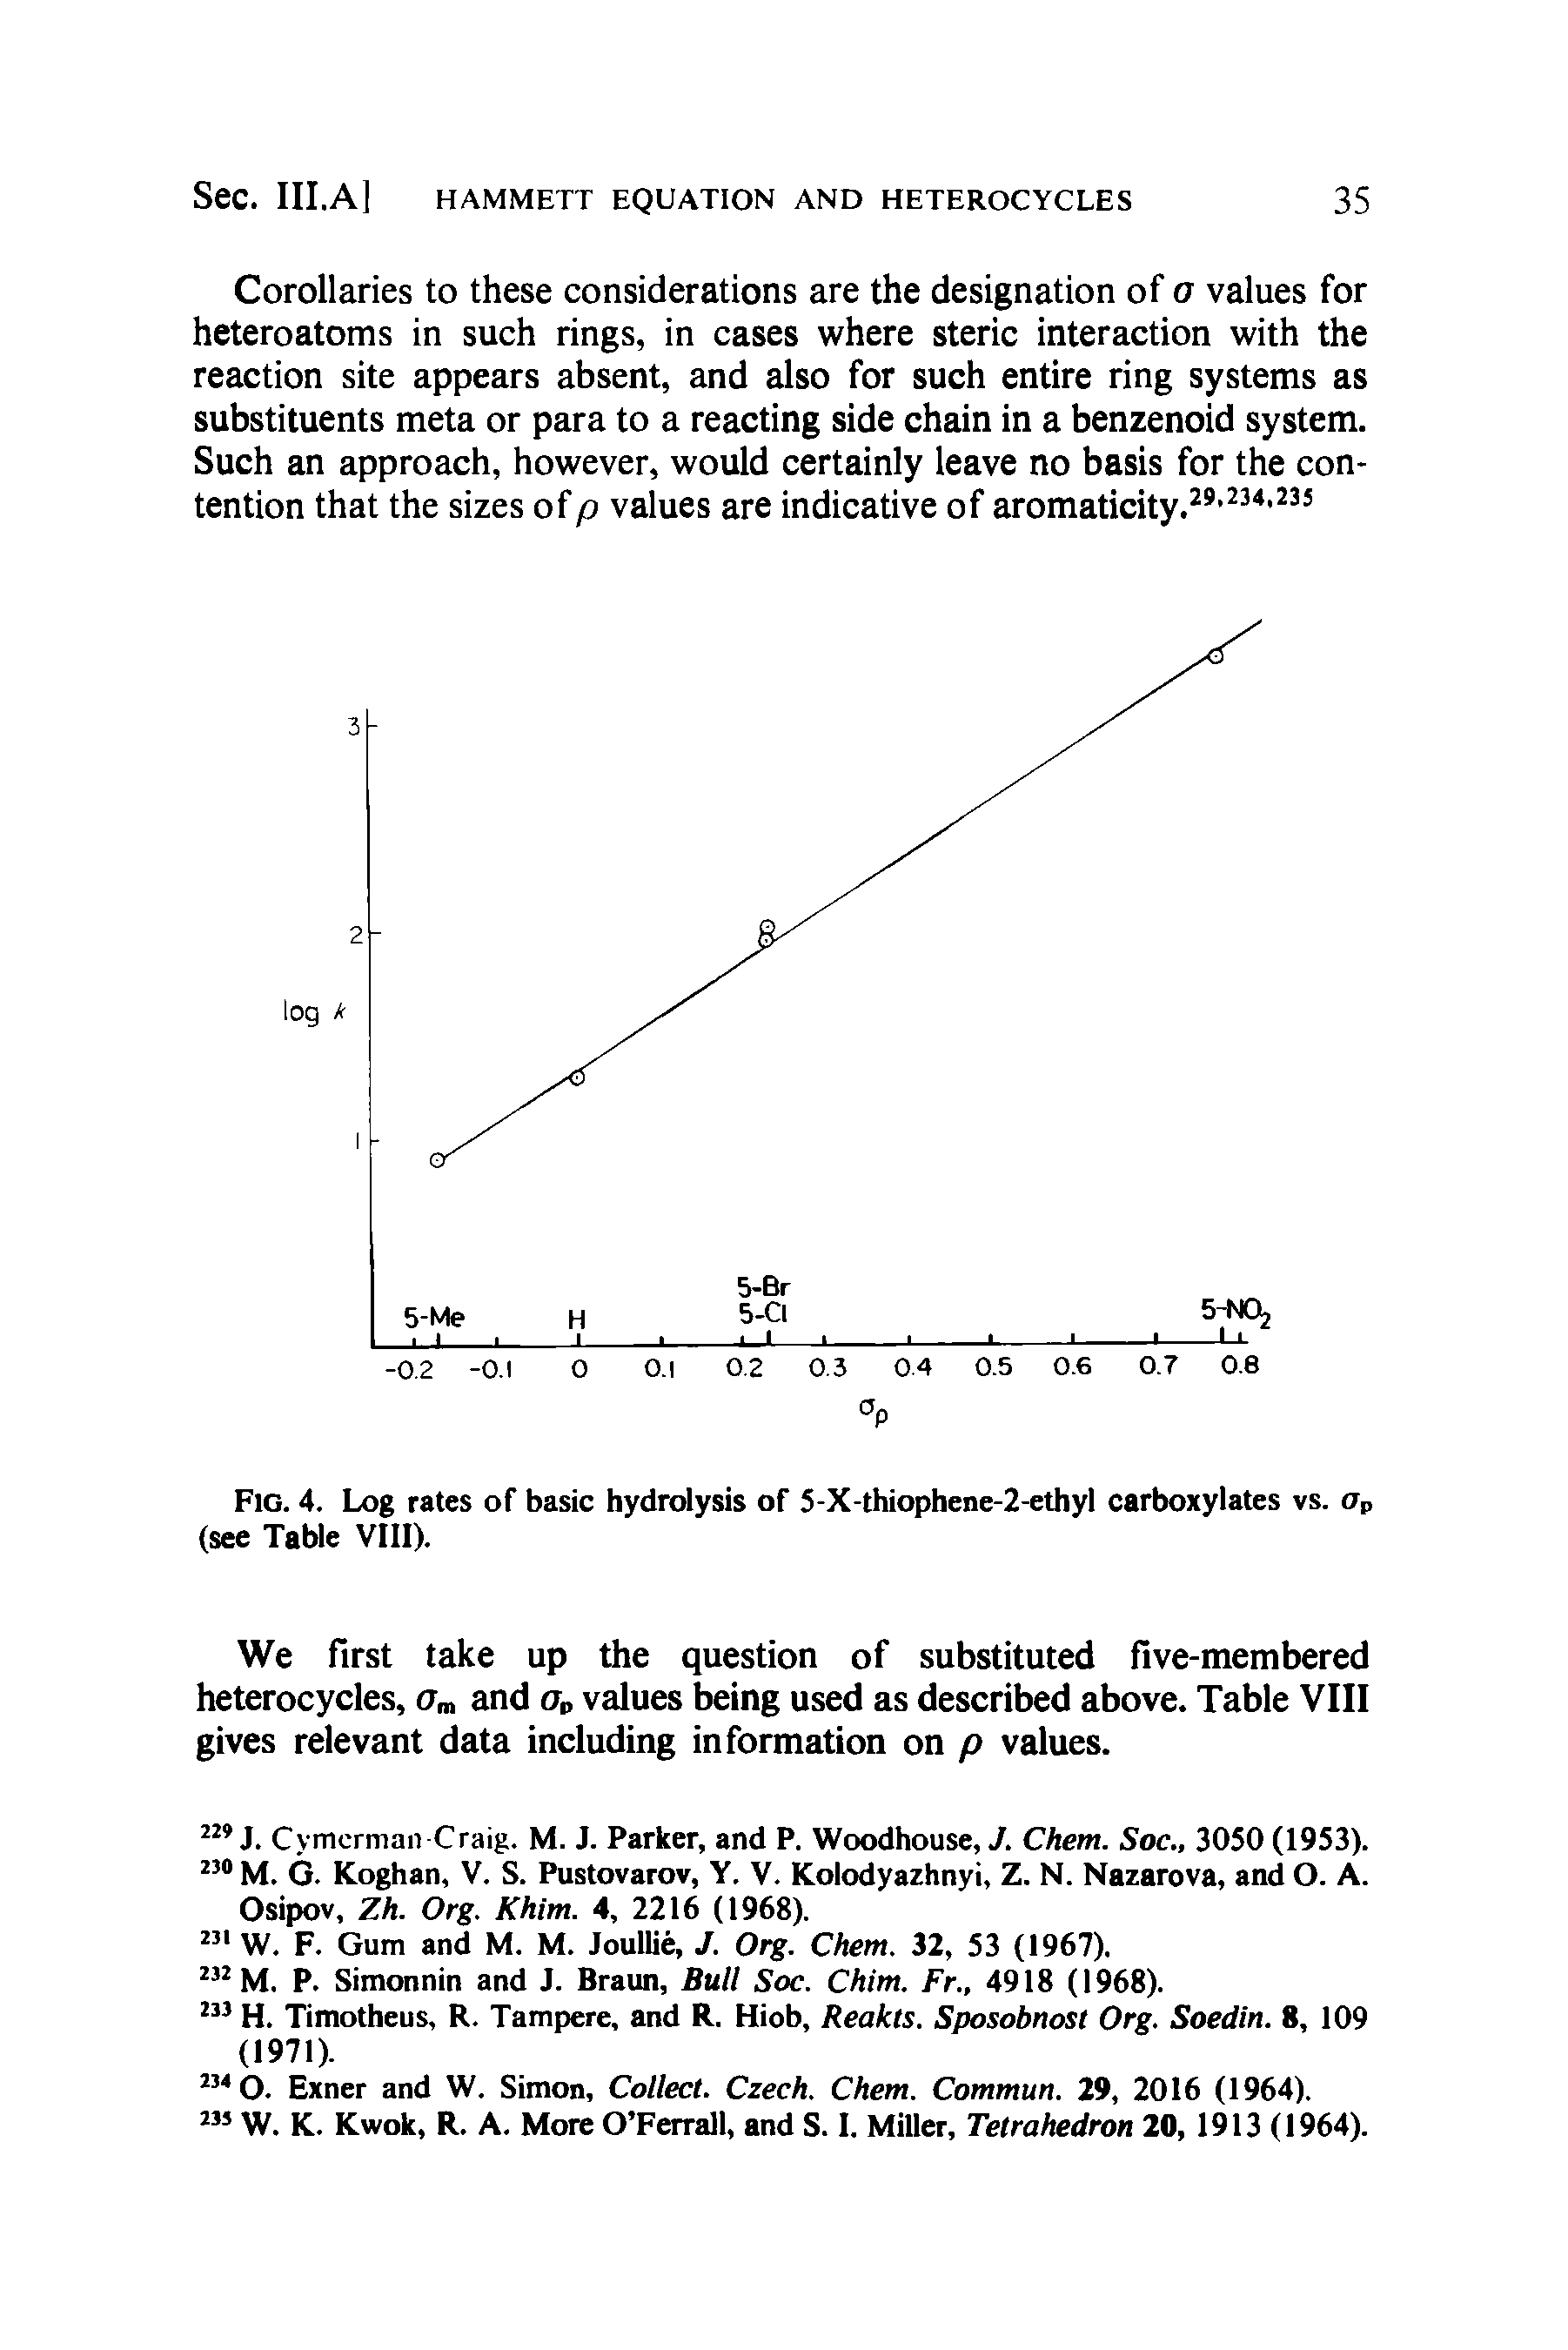 Fig. 4. Log rates of basic hydrolysis of 5-X-thiophene-2-ethyl carboxylates vs. ap (see Table VIII).